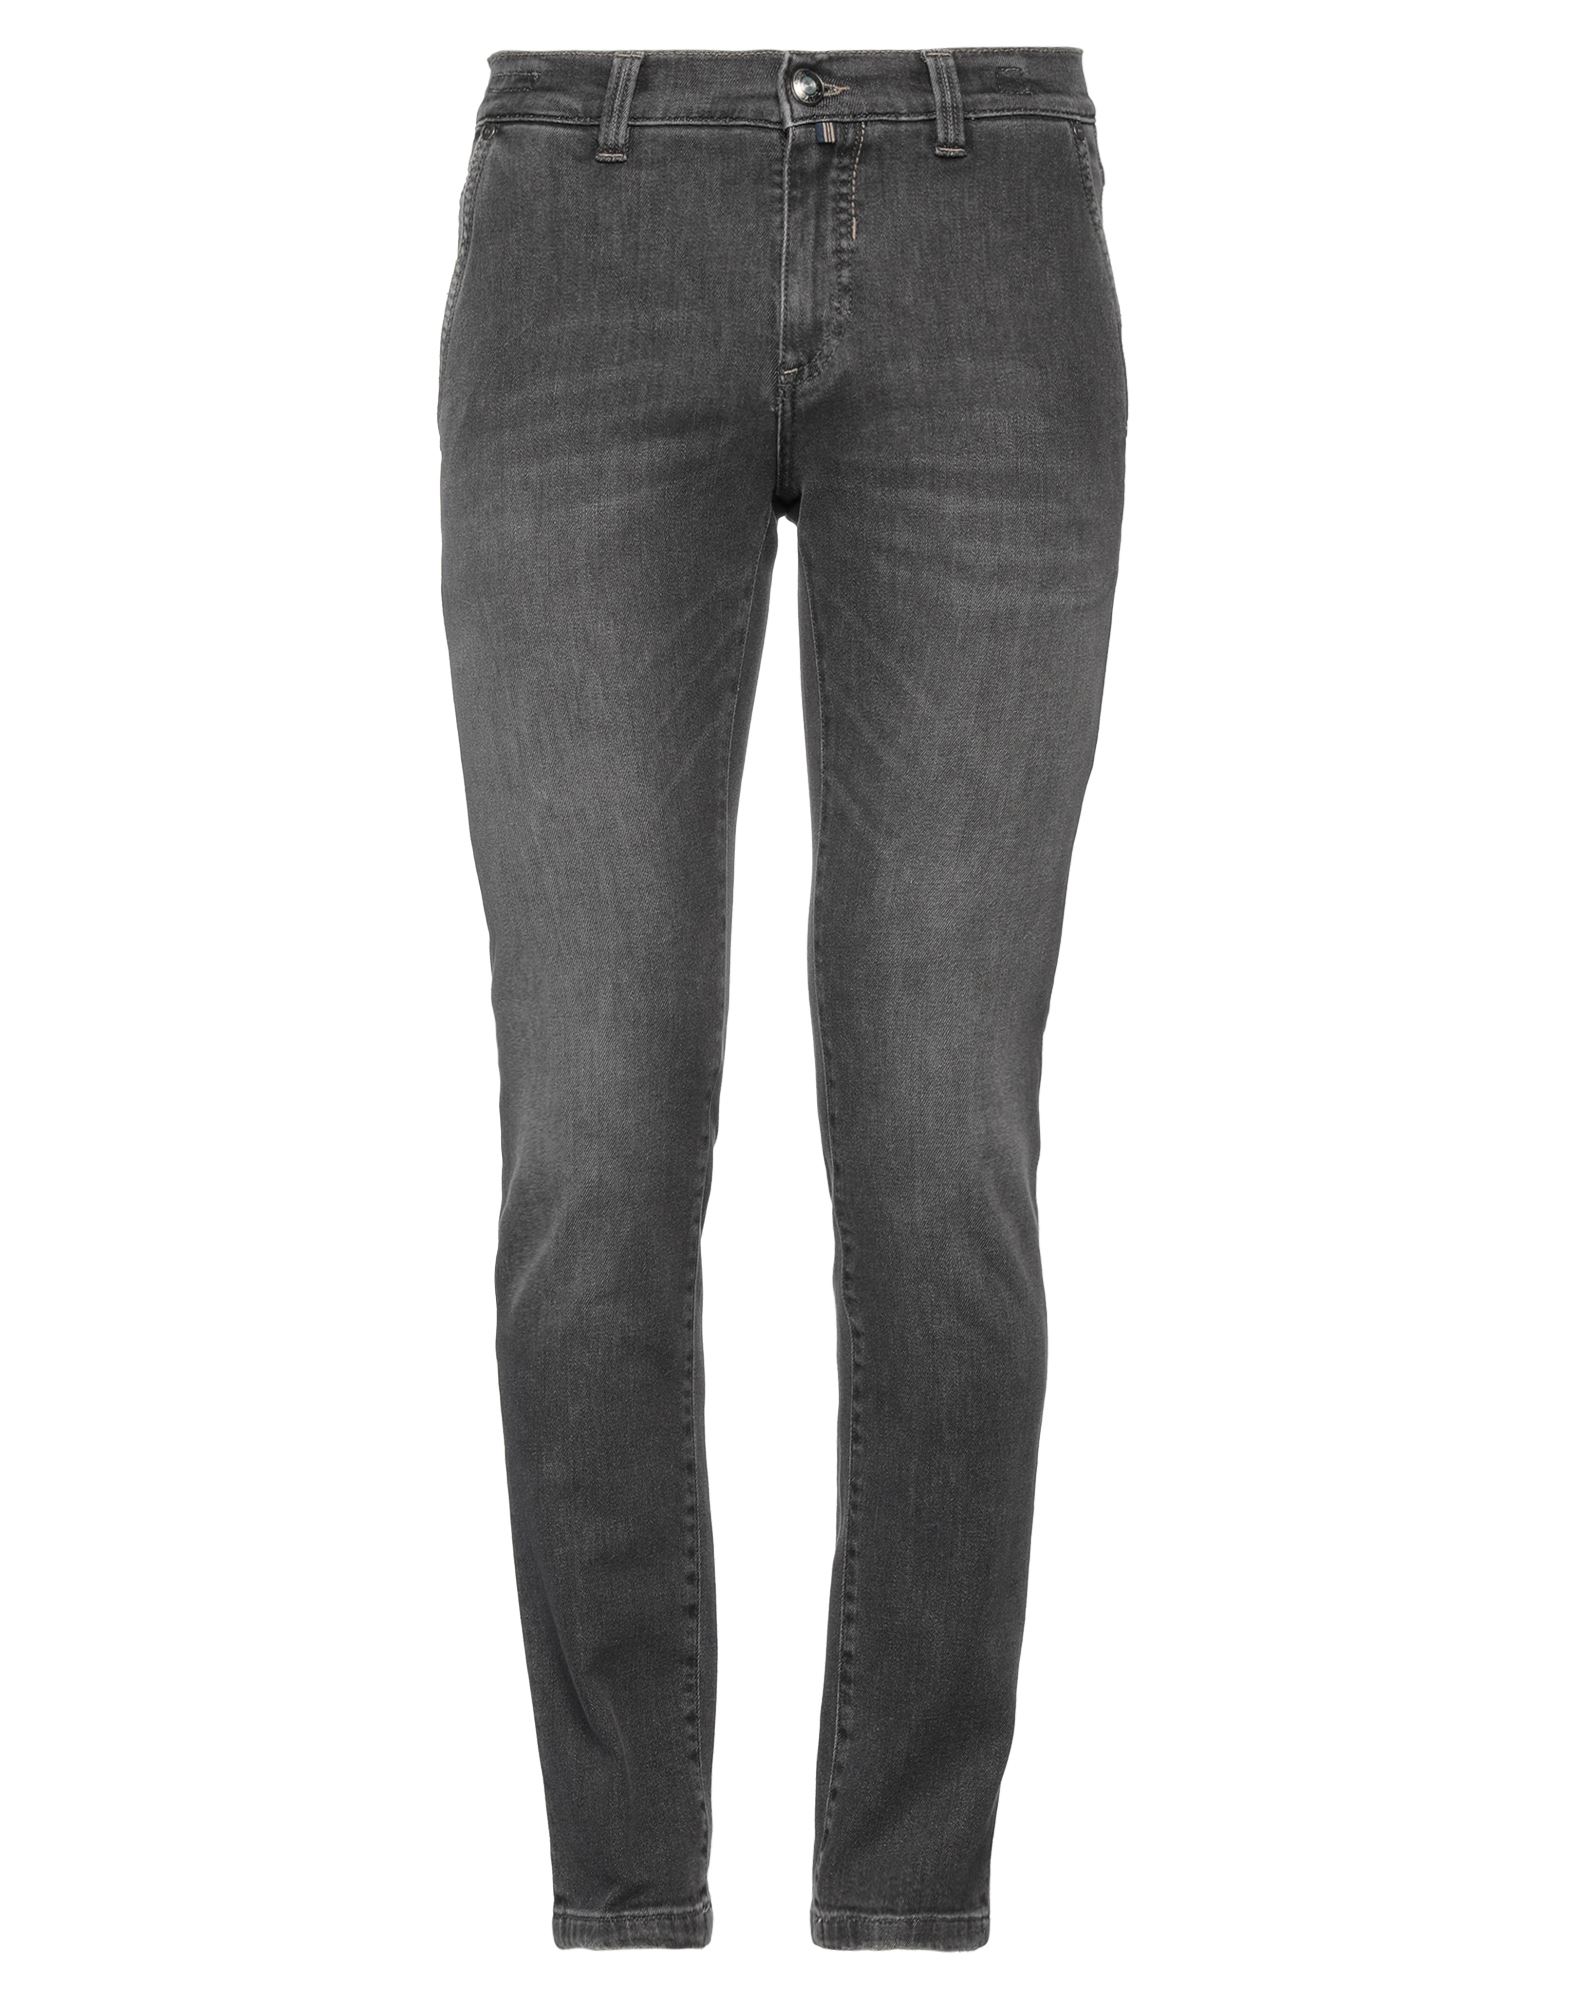 Nicwave Jeans In Gray